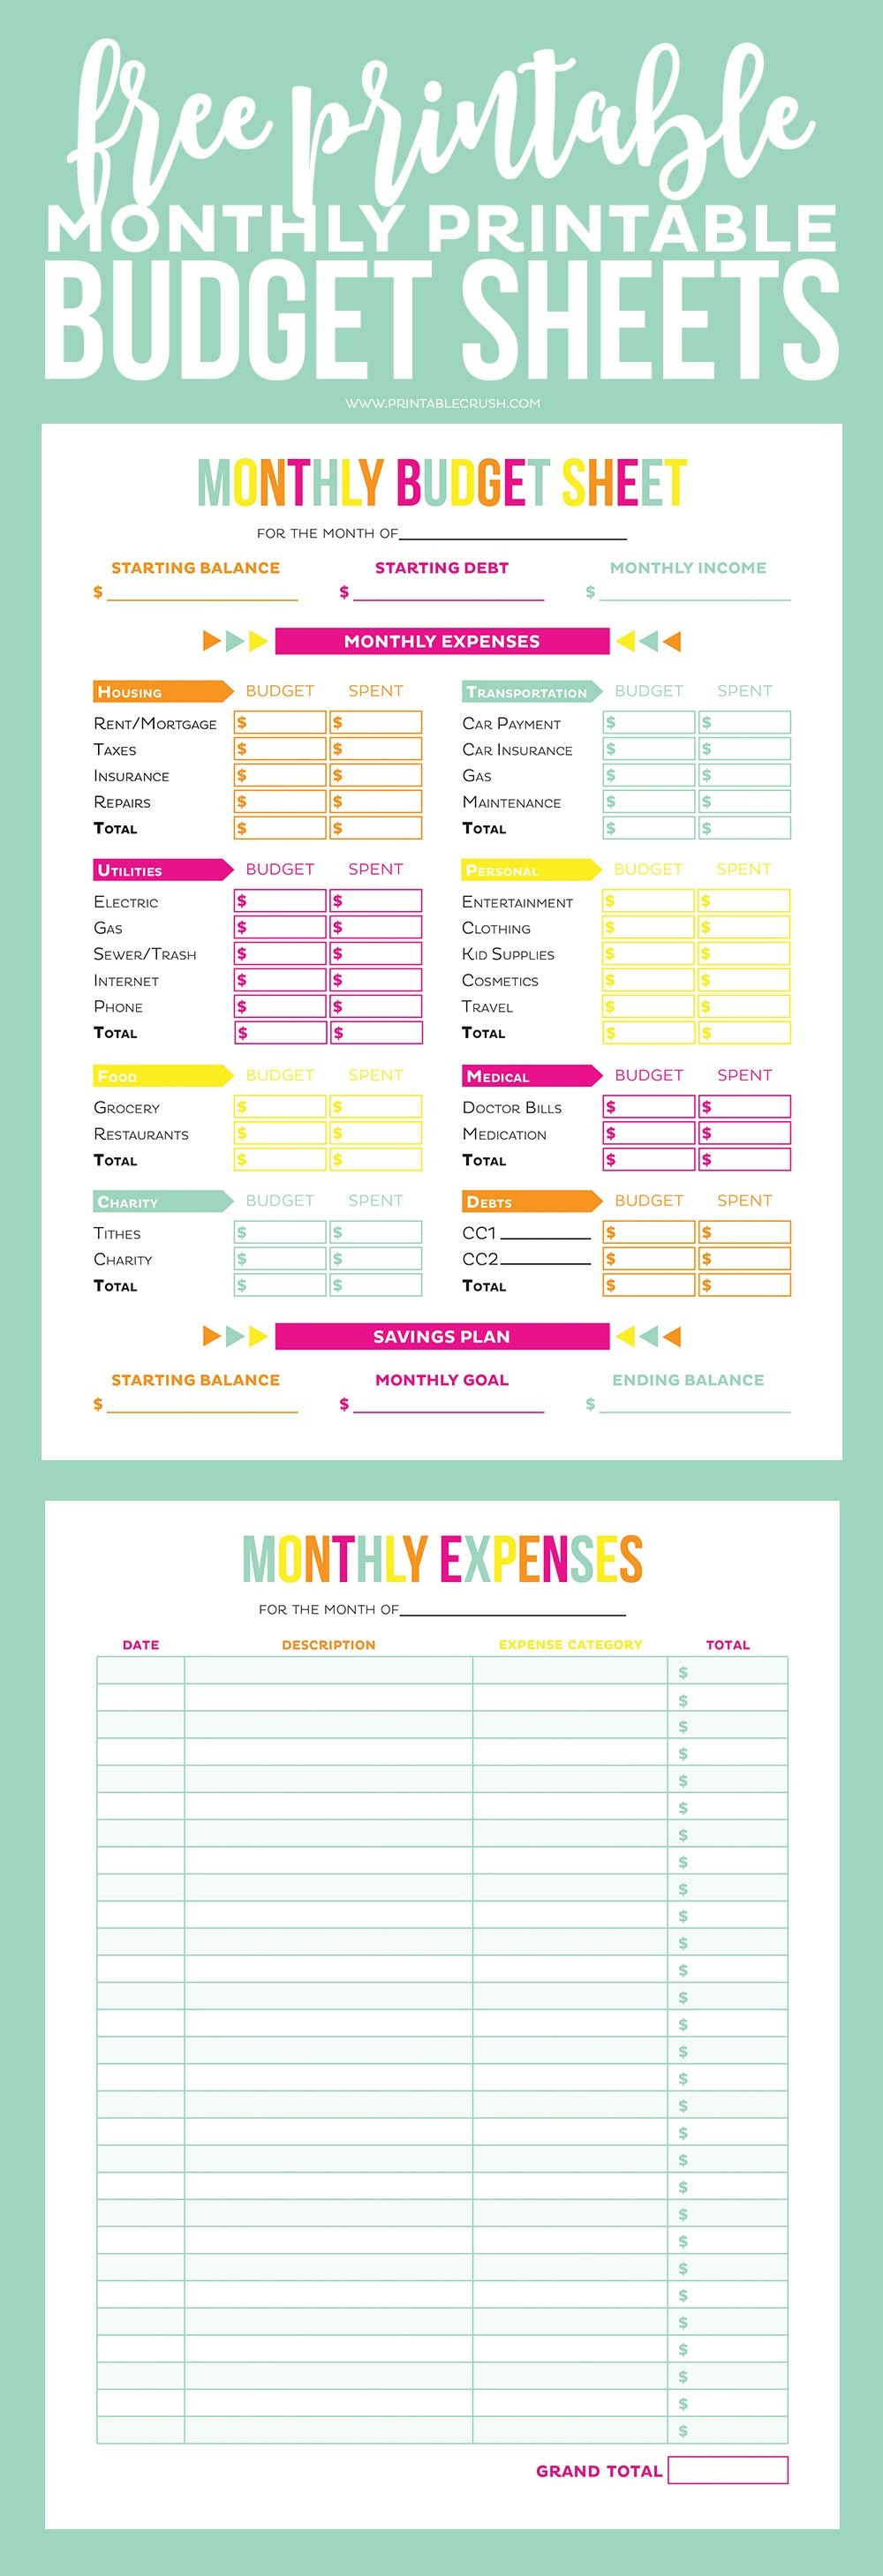 Get Your Finances In Order With These Free Printable Budget Sheets - Free Printable Finance Sheets